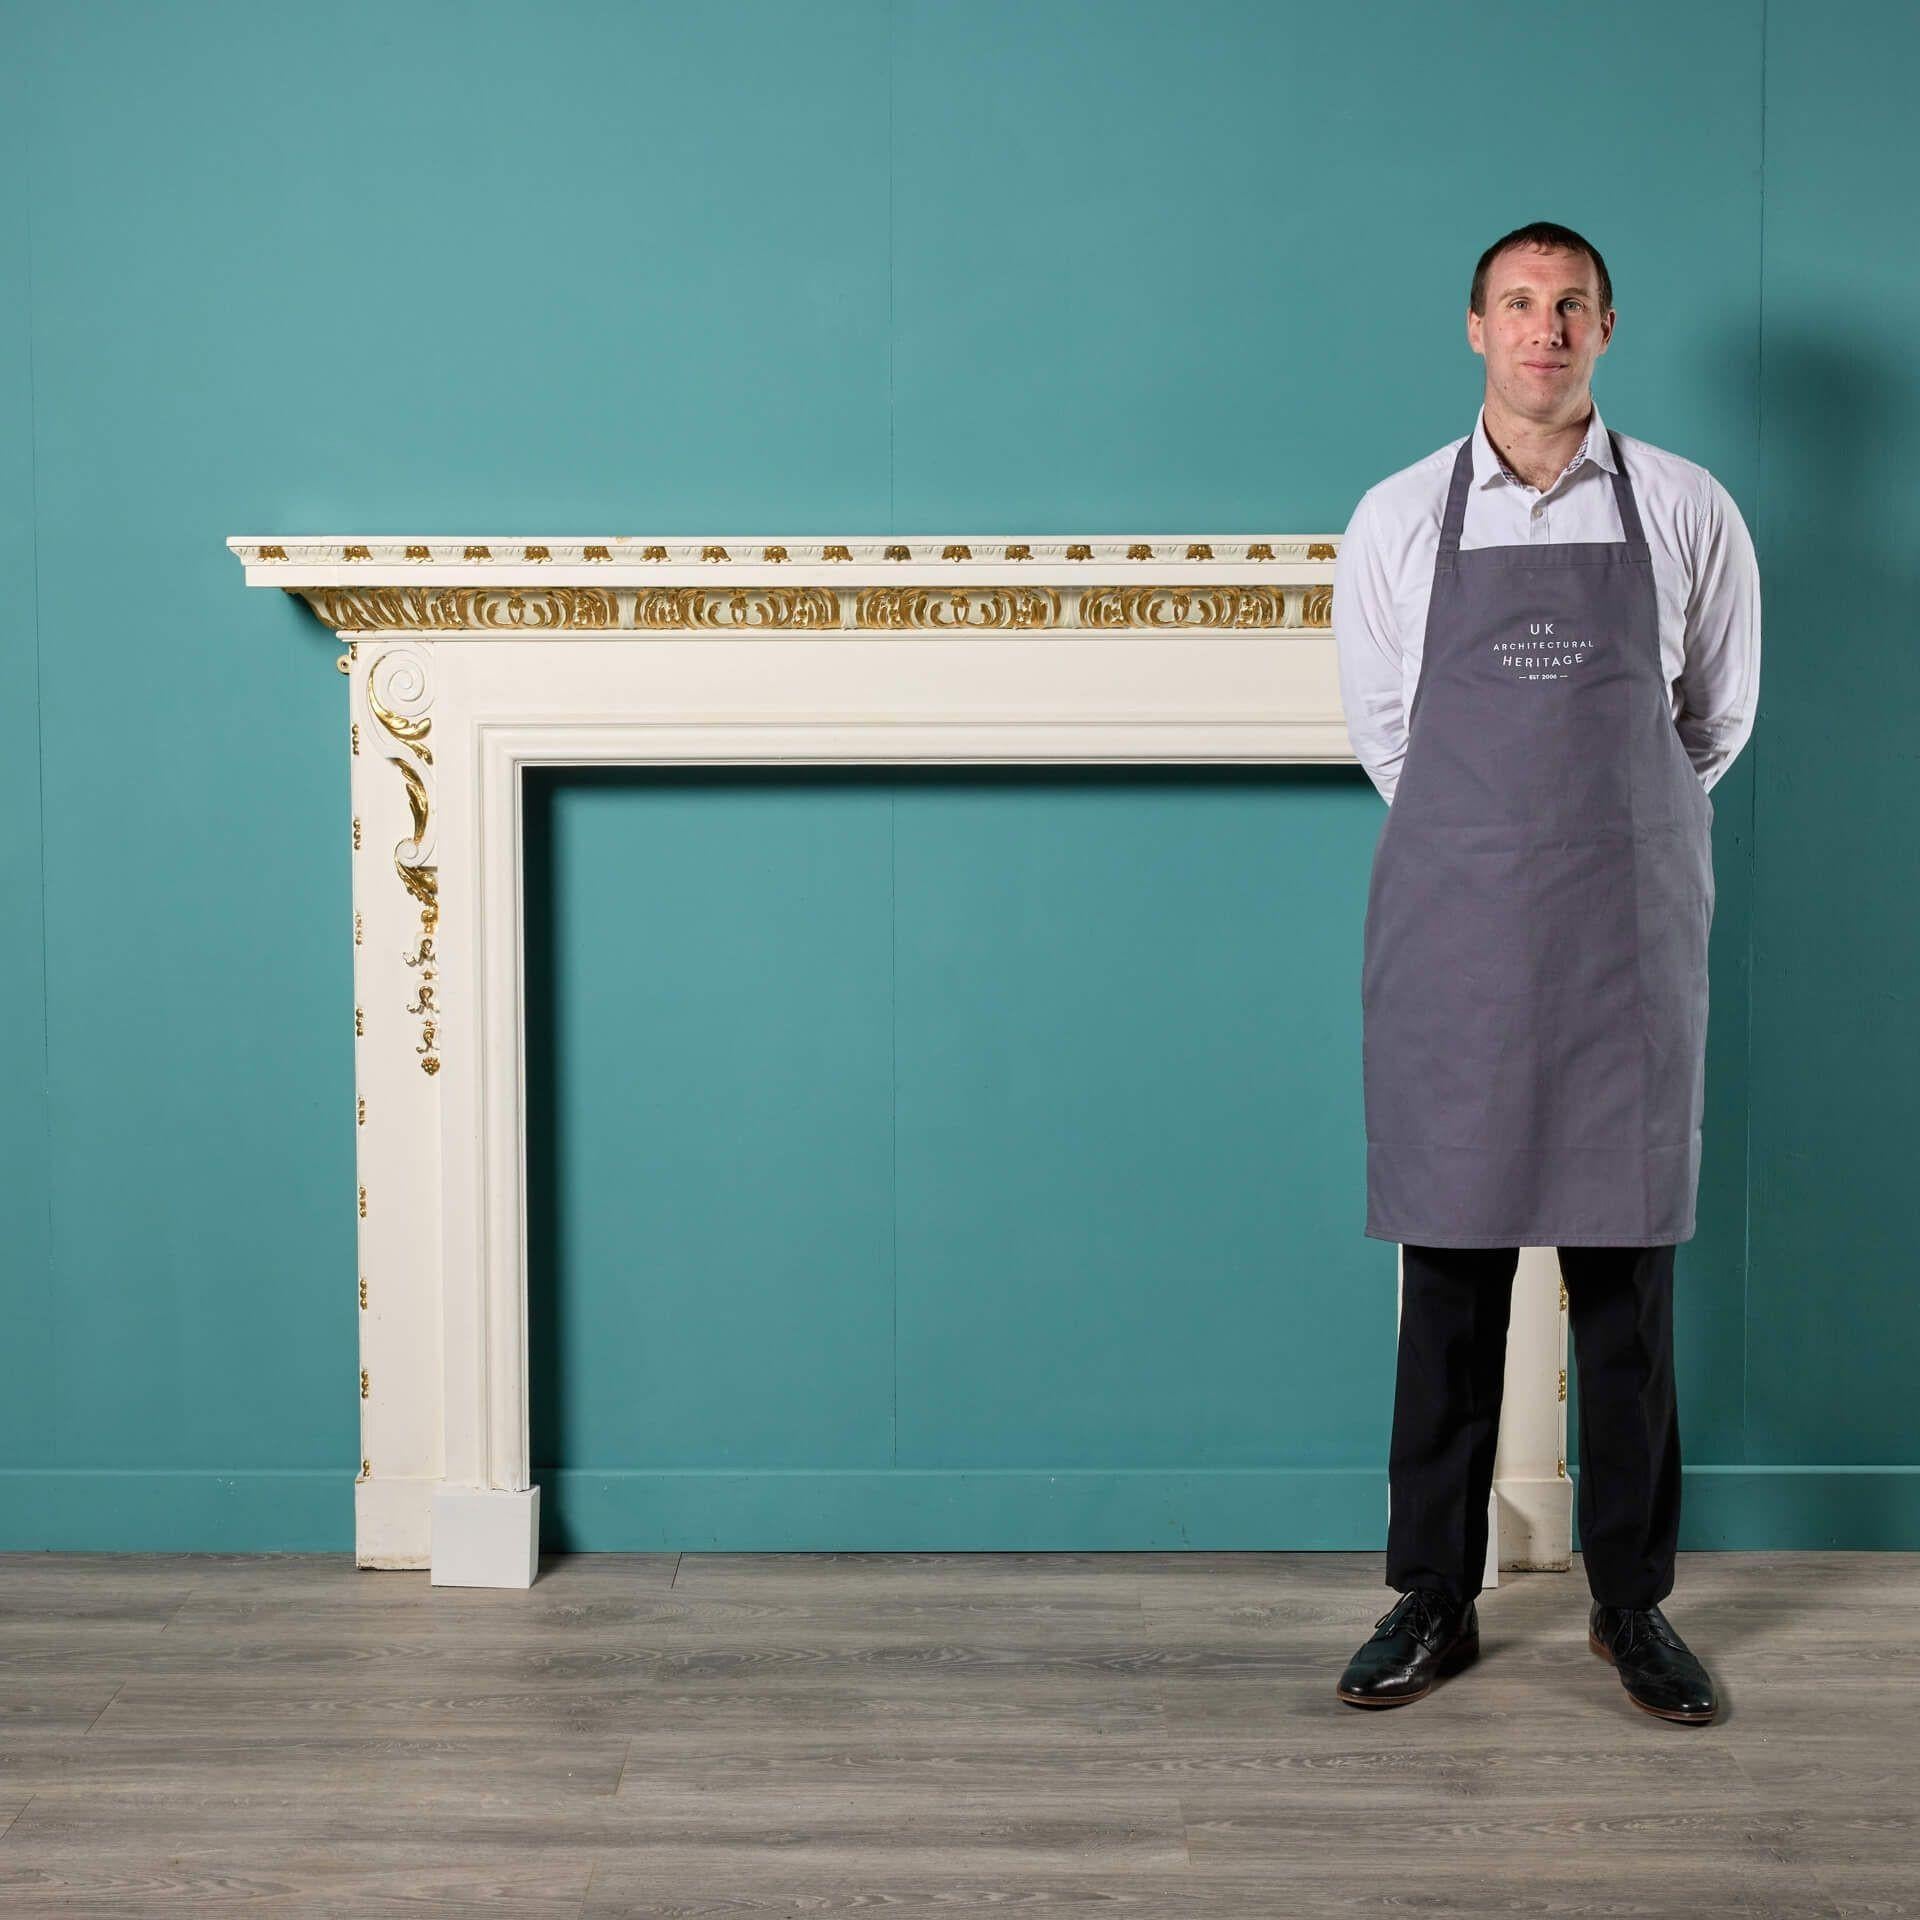 An antique Georgian style painted pine fireplace, sourced from a £13 million house in Hampstead, London.

Painted with gold leaf beneath the mantel and scrolls decorating the jambs, this late 19th century fire surround is an ode to classic Georgian